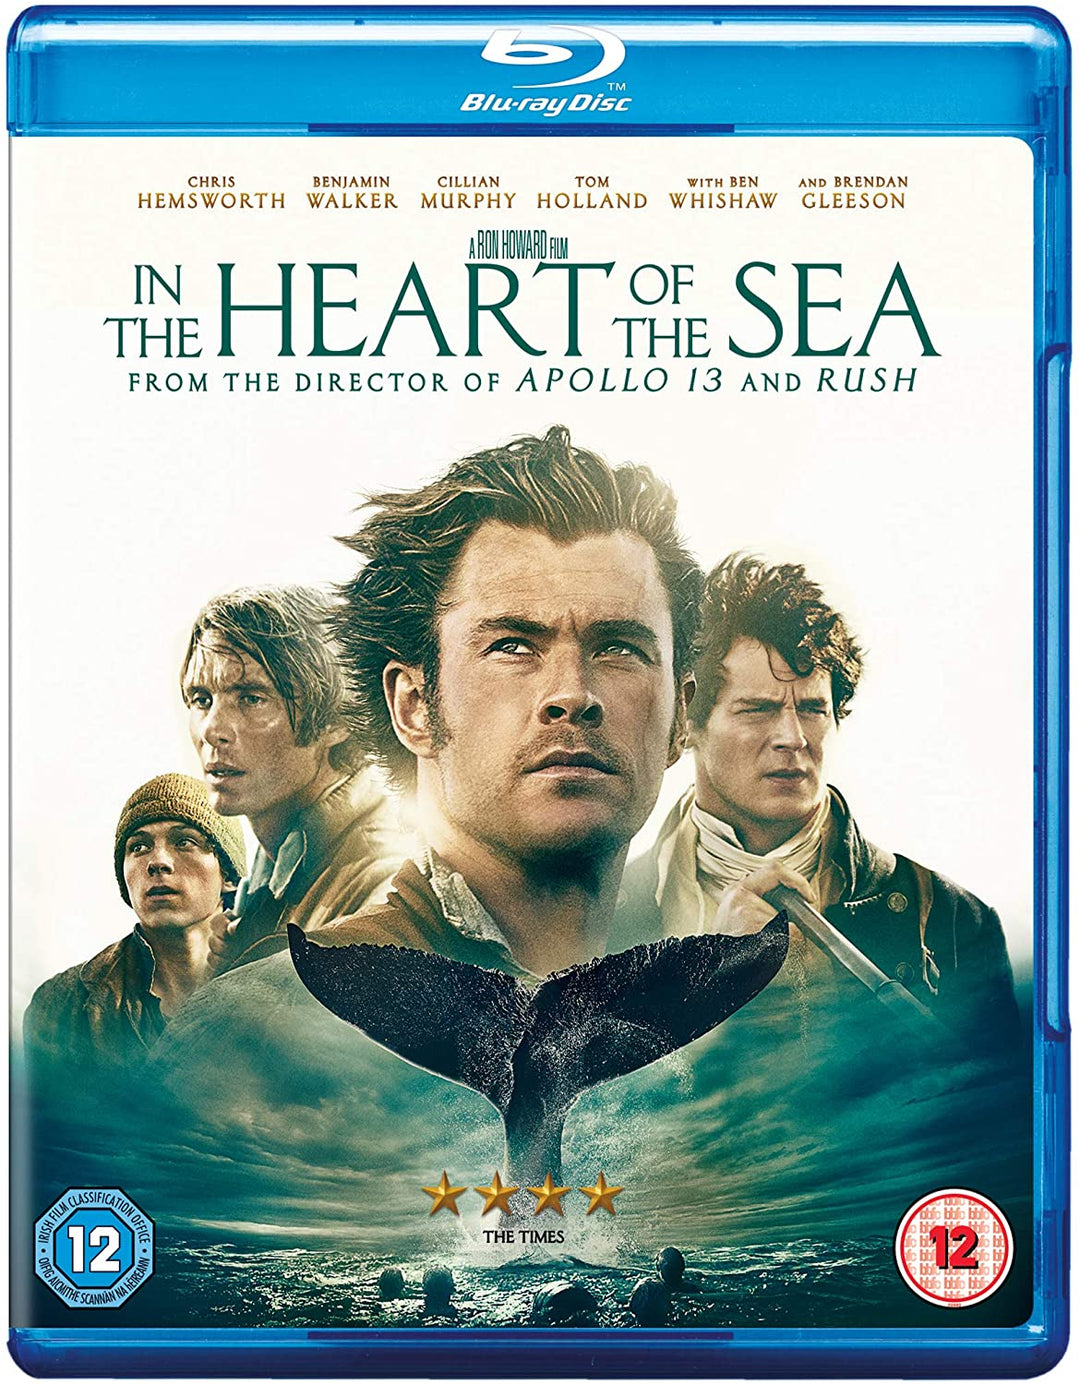 In the Heart of the Sea [Blu-ray] [2016] [Region Free]